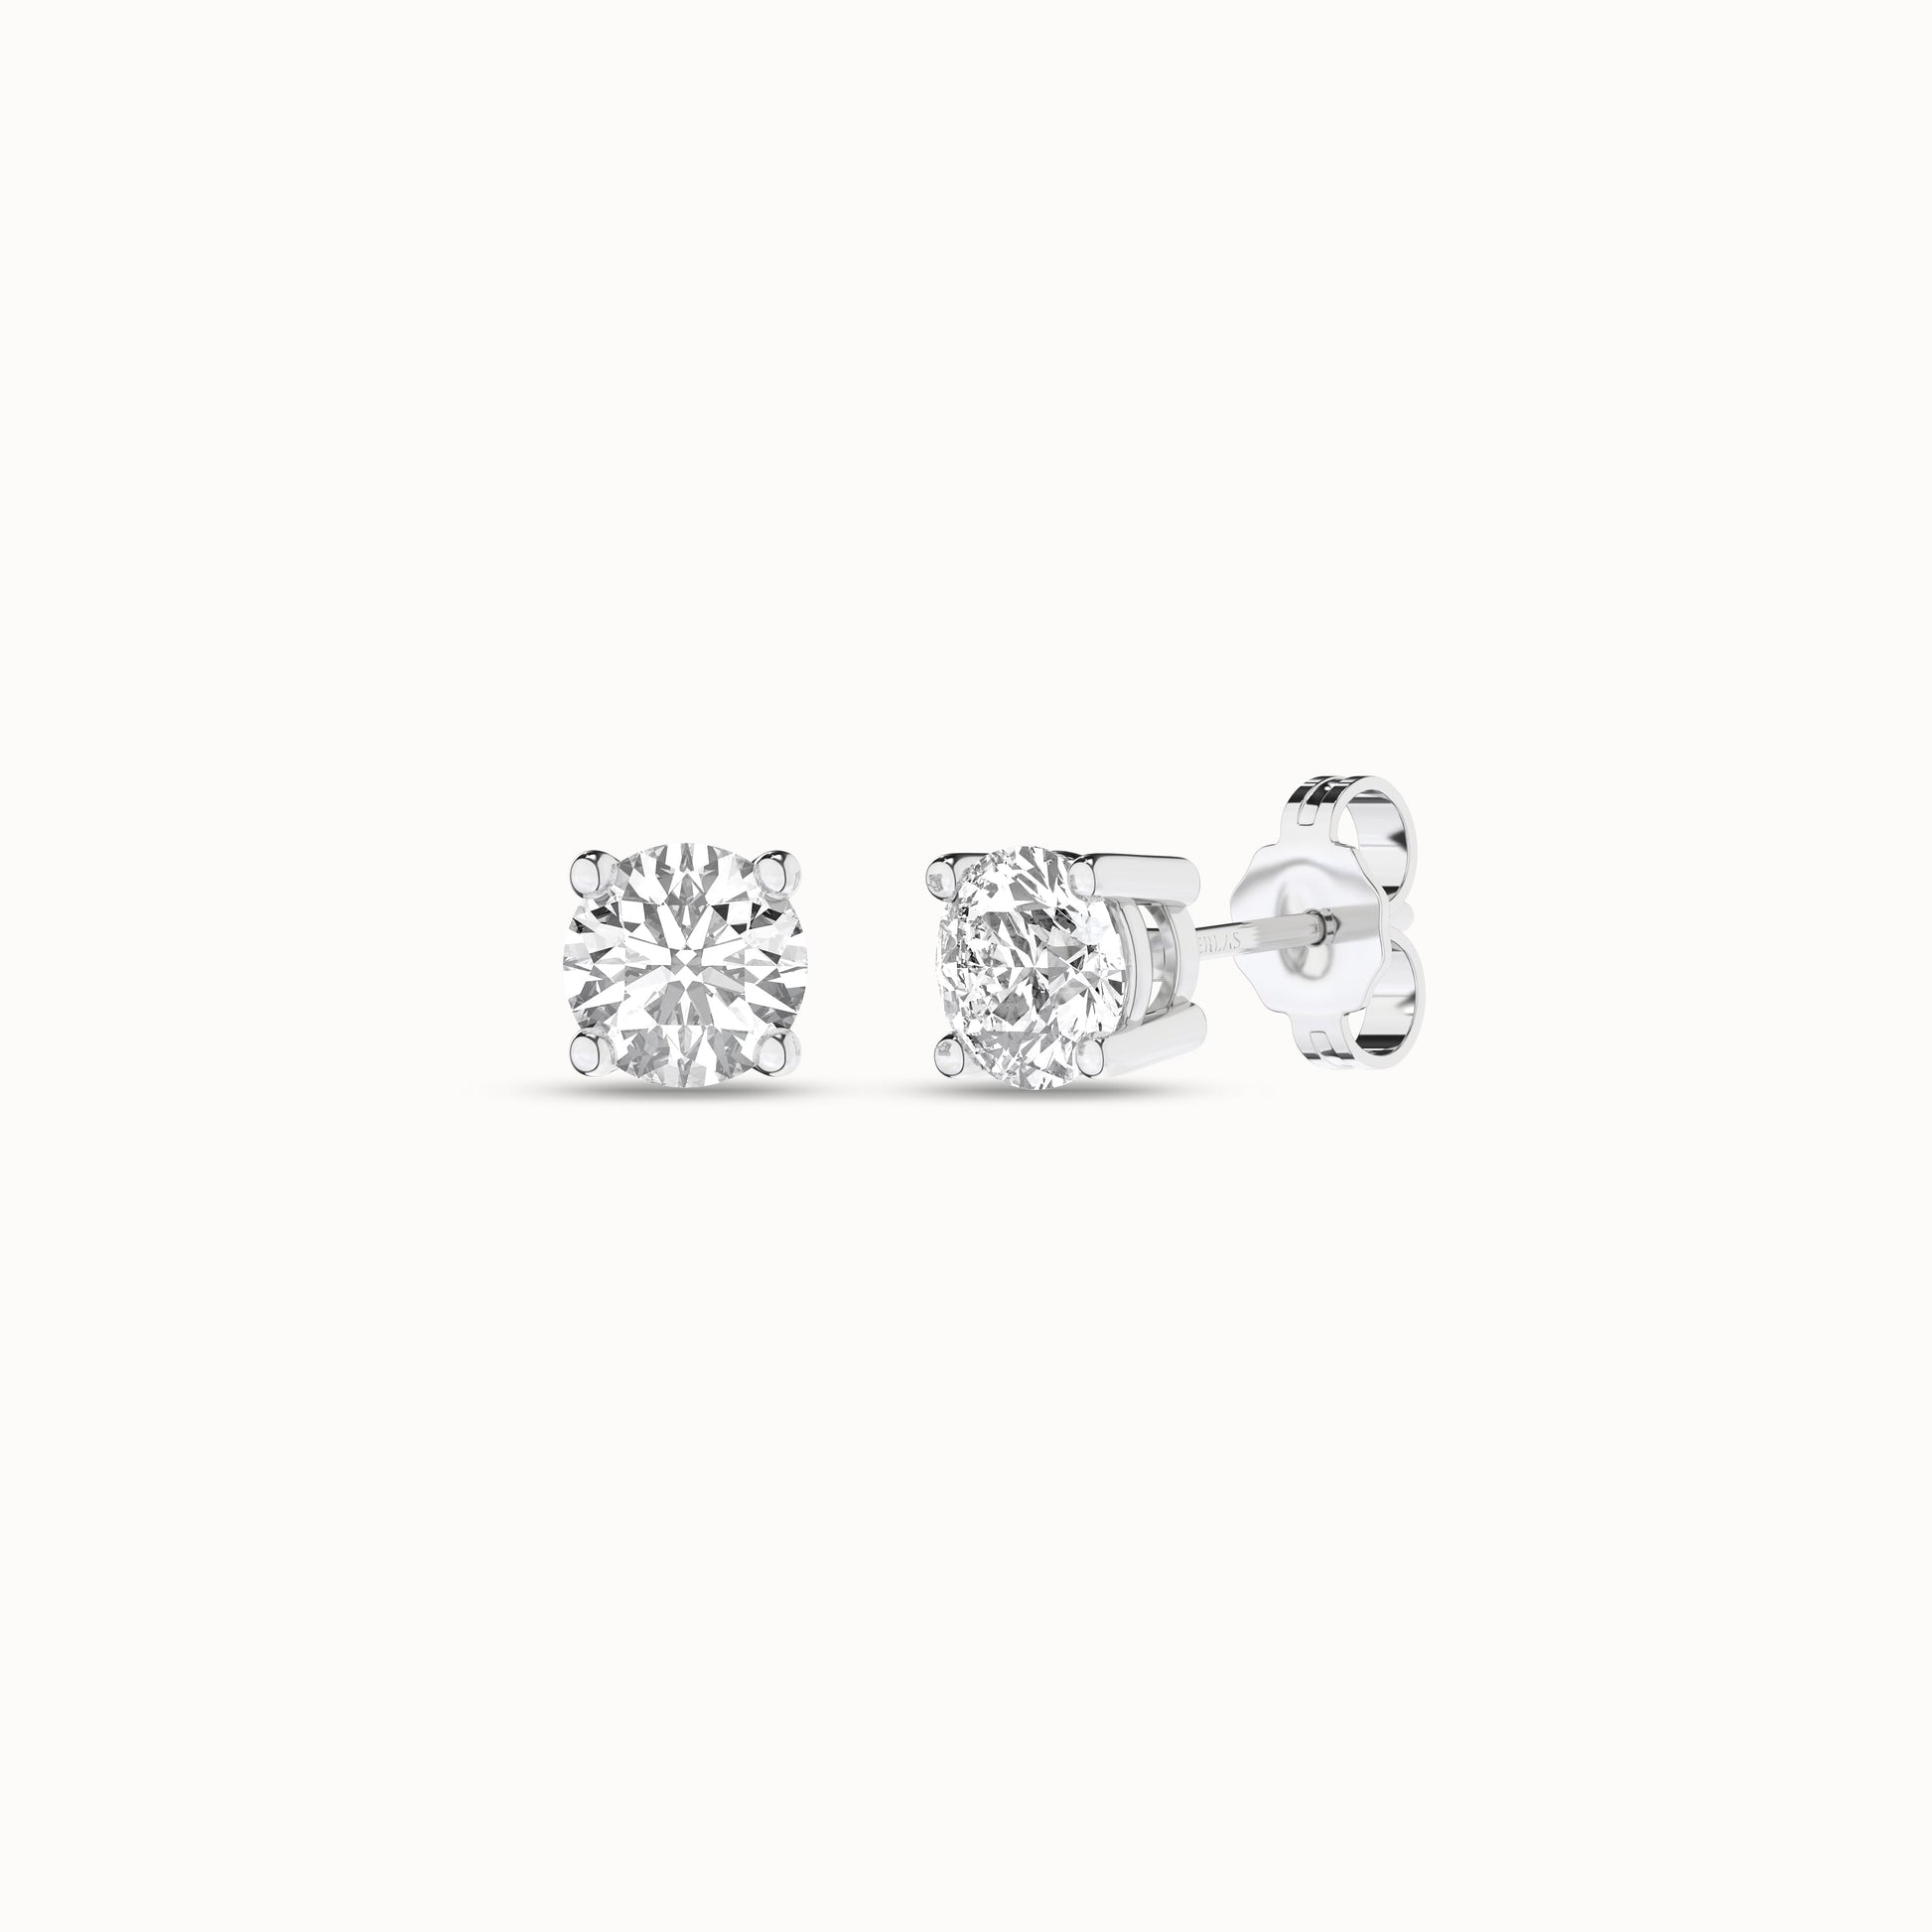 Round Solitaire Studs_Product Angle_1Ct. - 2